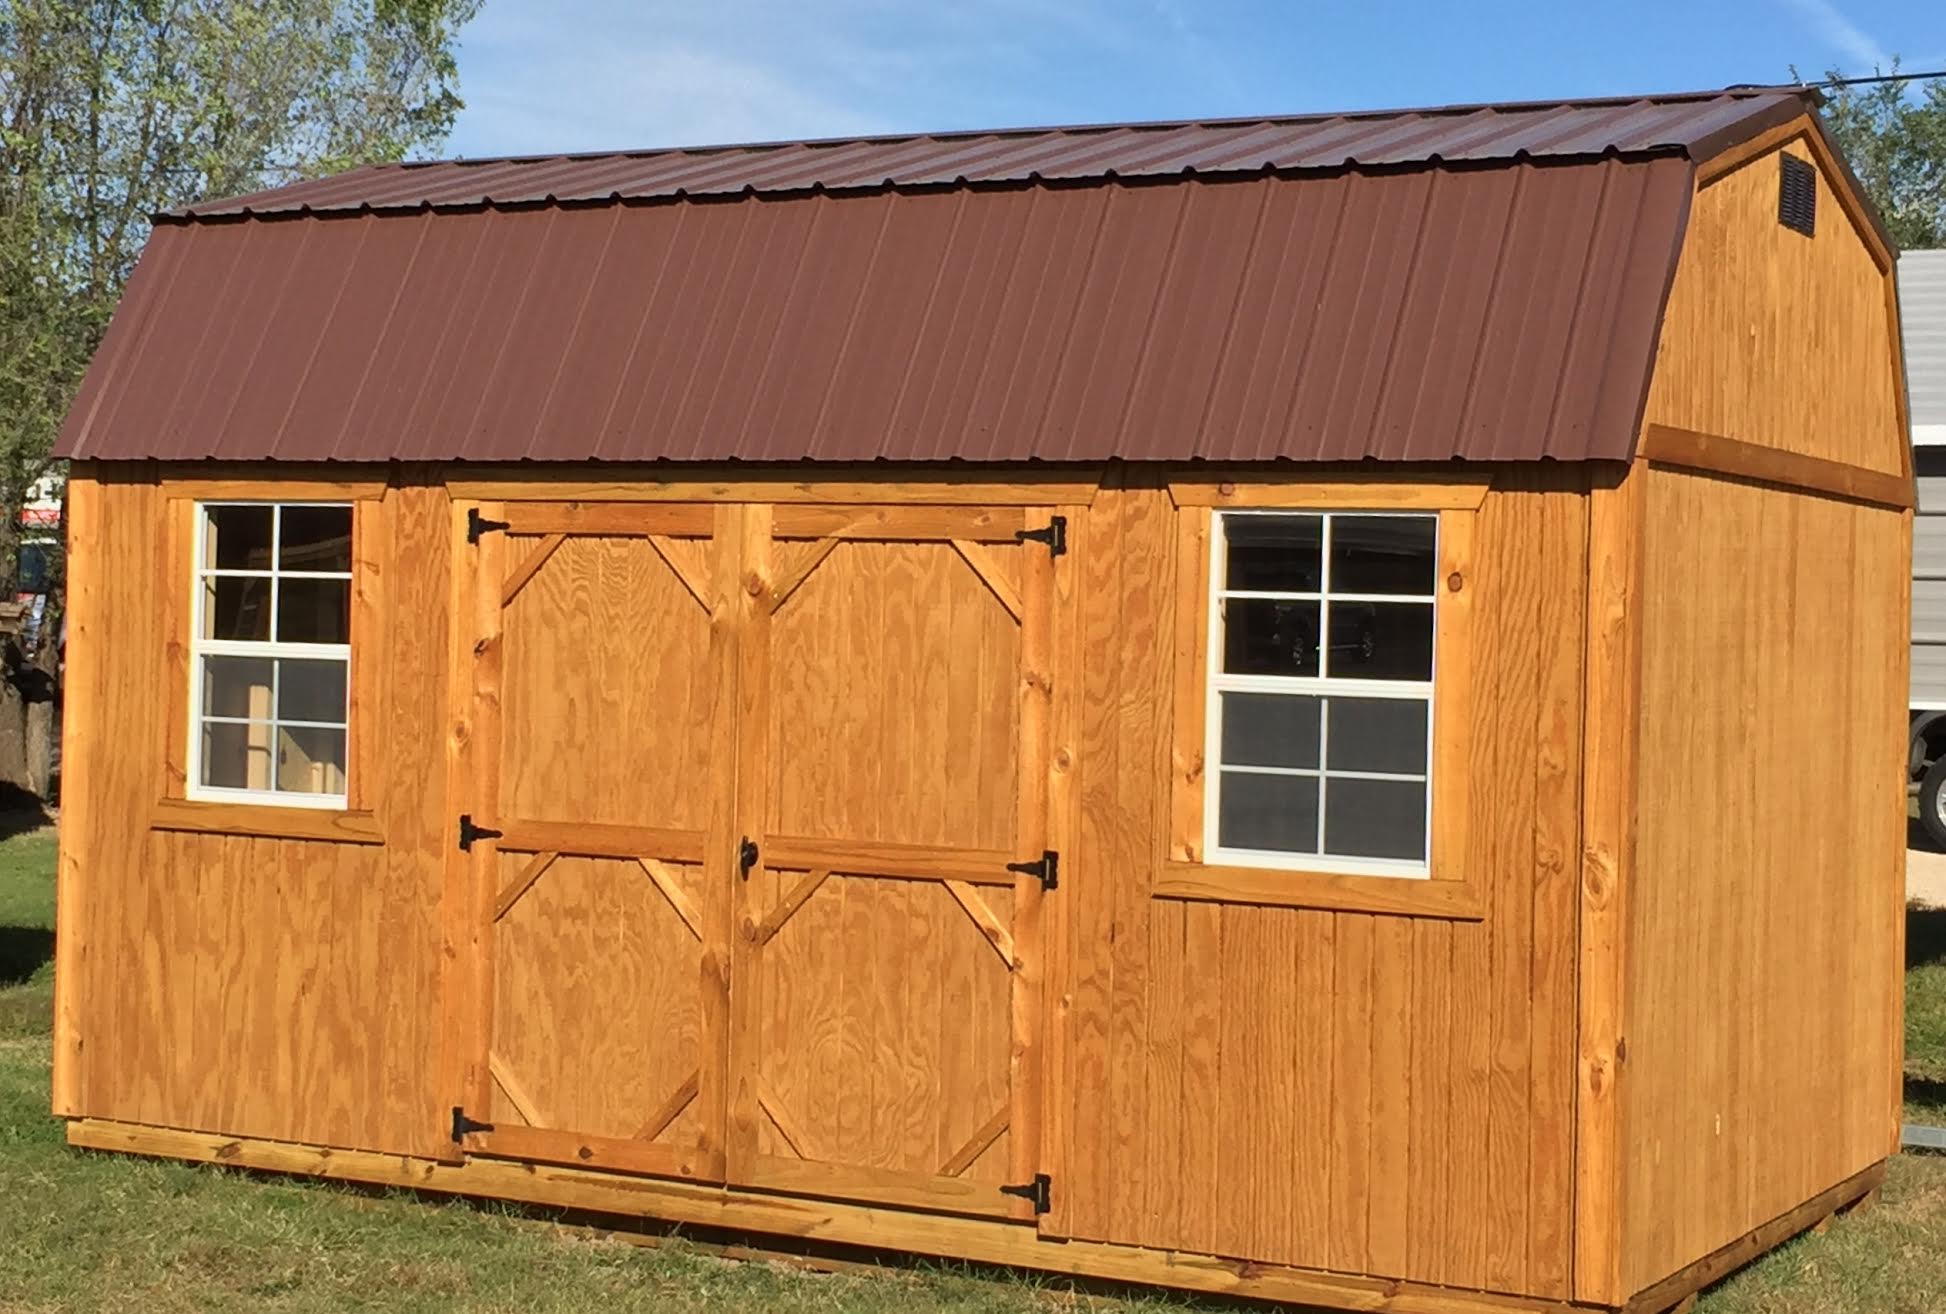 Light treated wood side lofted barn with brown metal roof